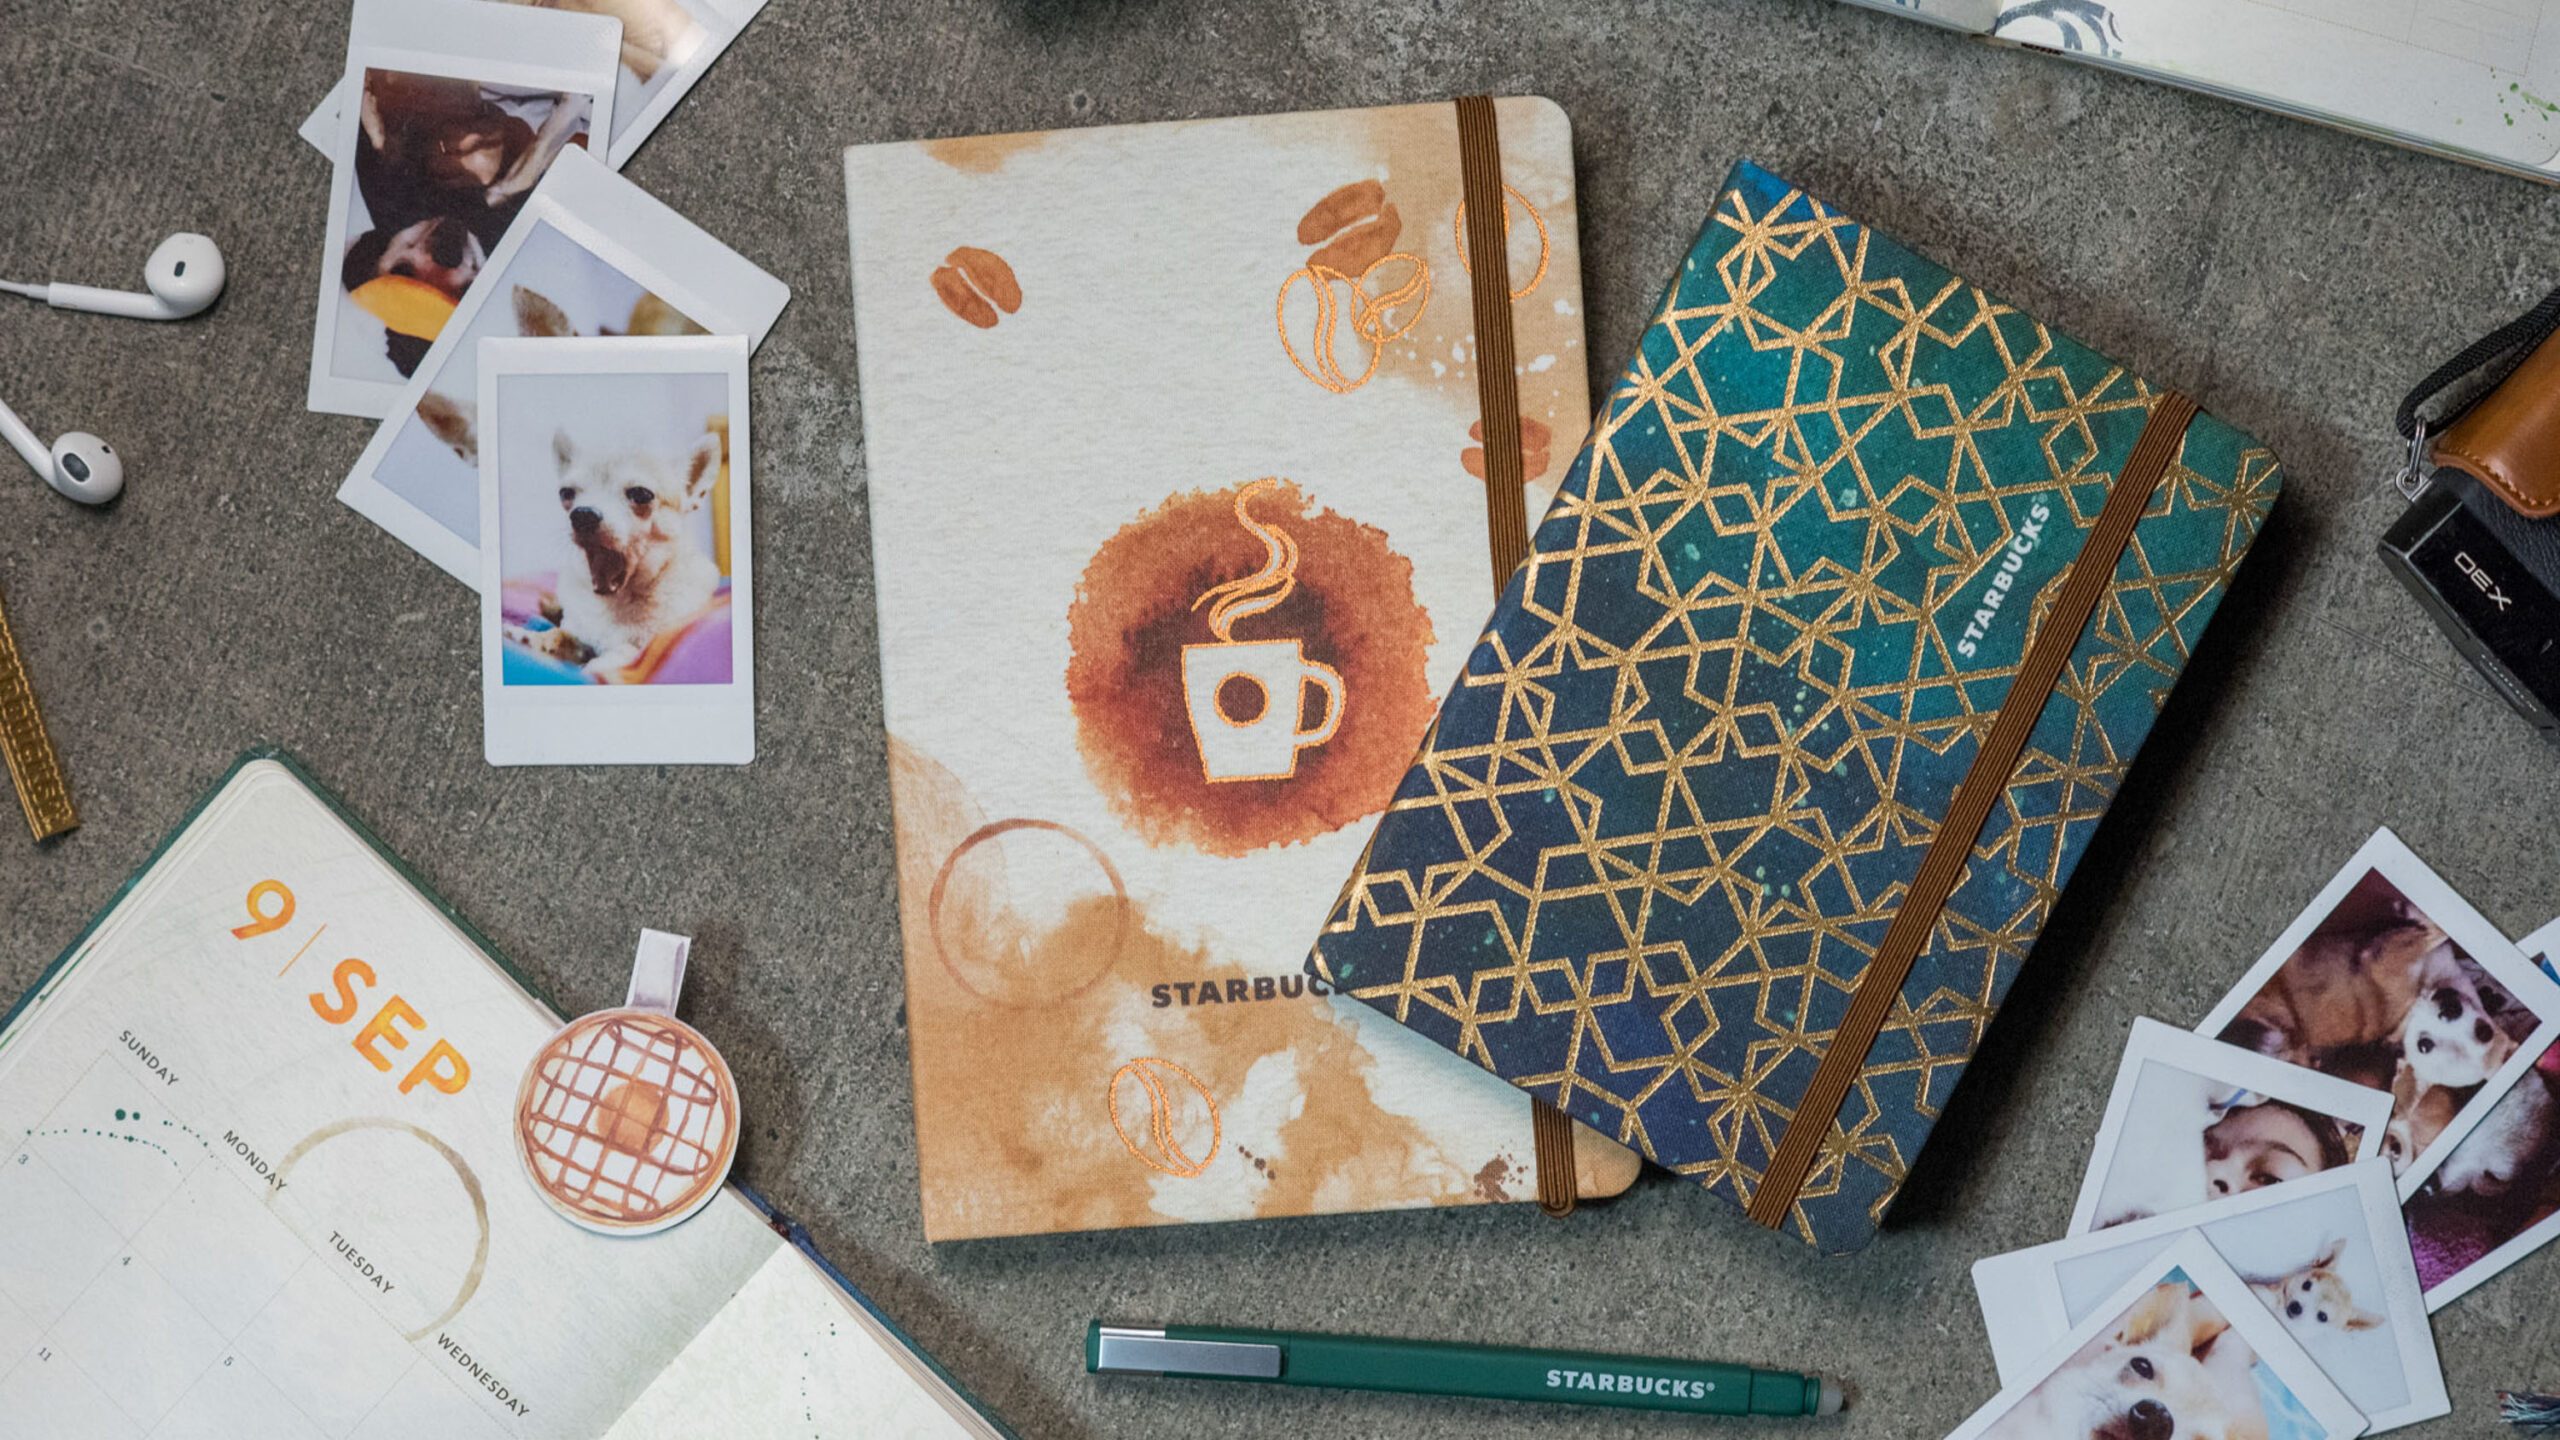 Starbucks 2017 planners: Up-close look at 2 gorgeous designs